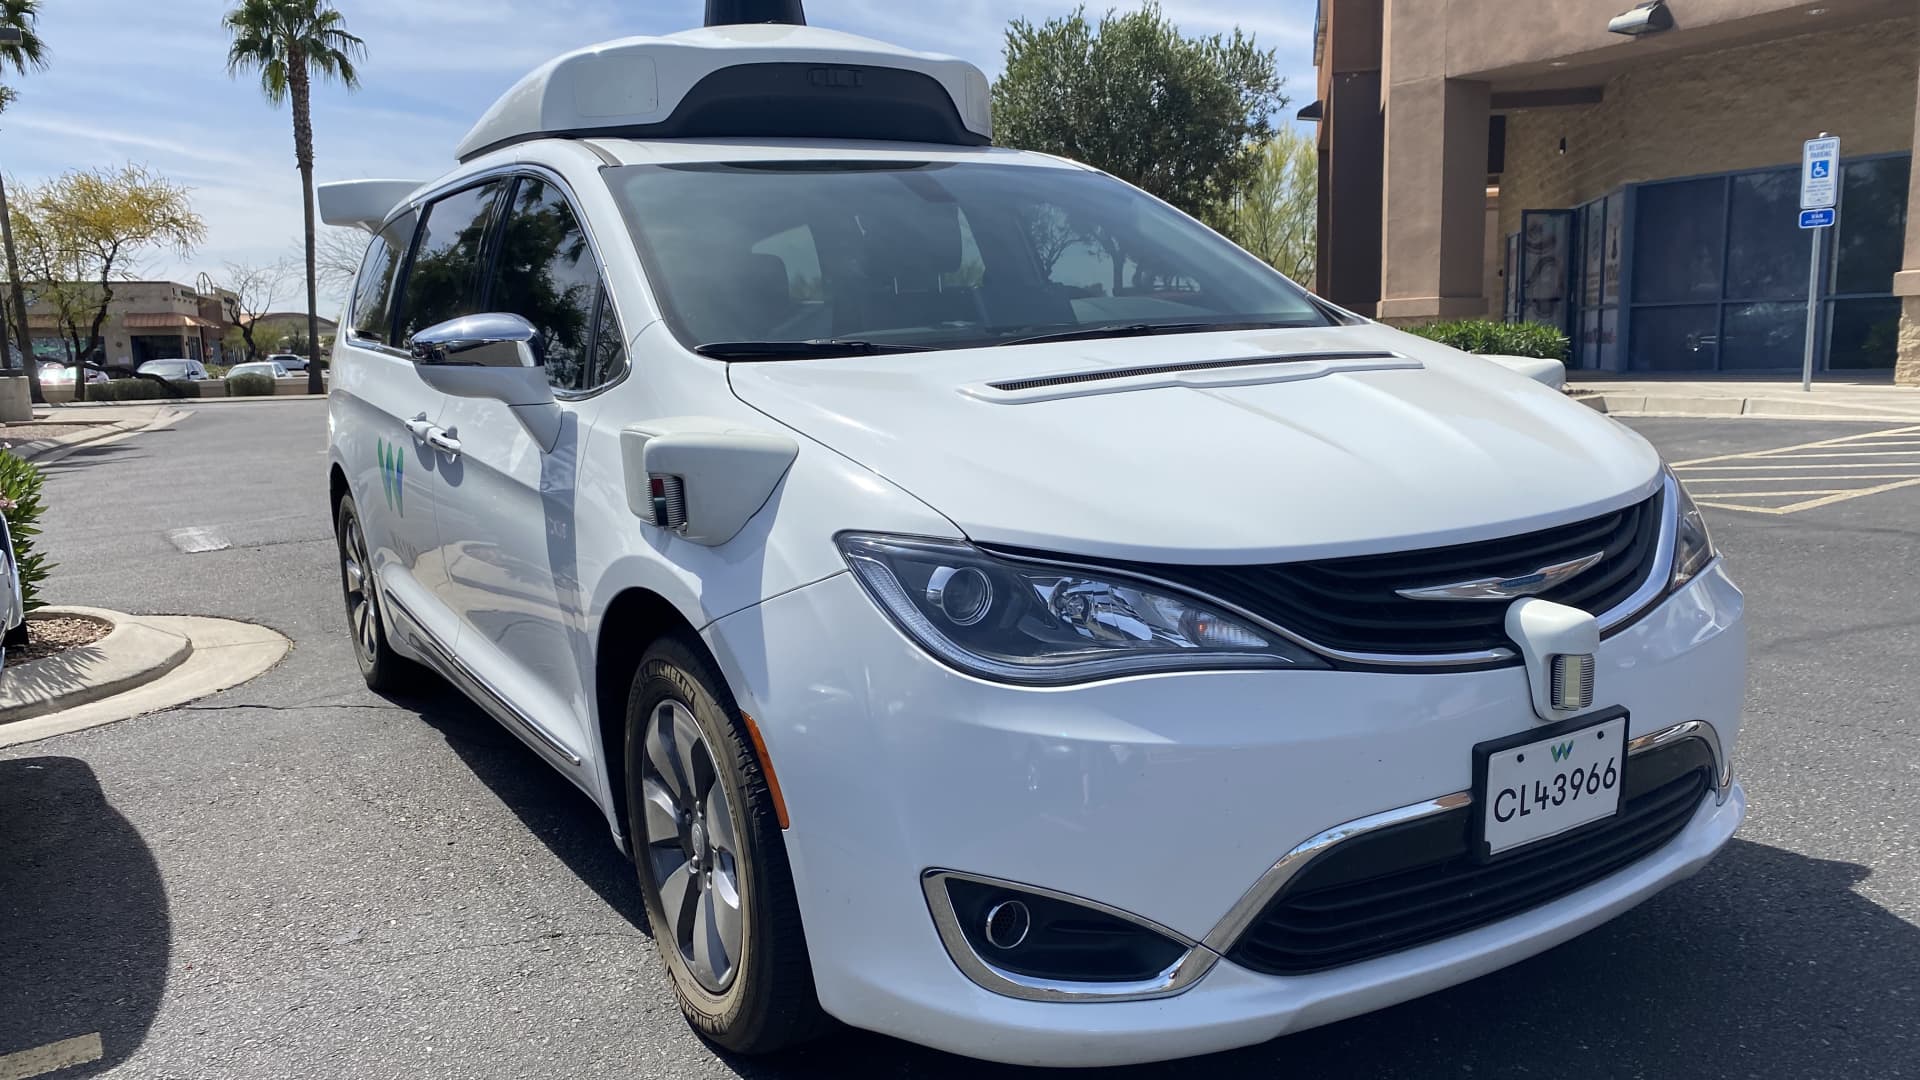 ‘A ghost is driving the car’ — my peaceful and productive experience in a Waymo self-driving van